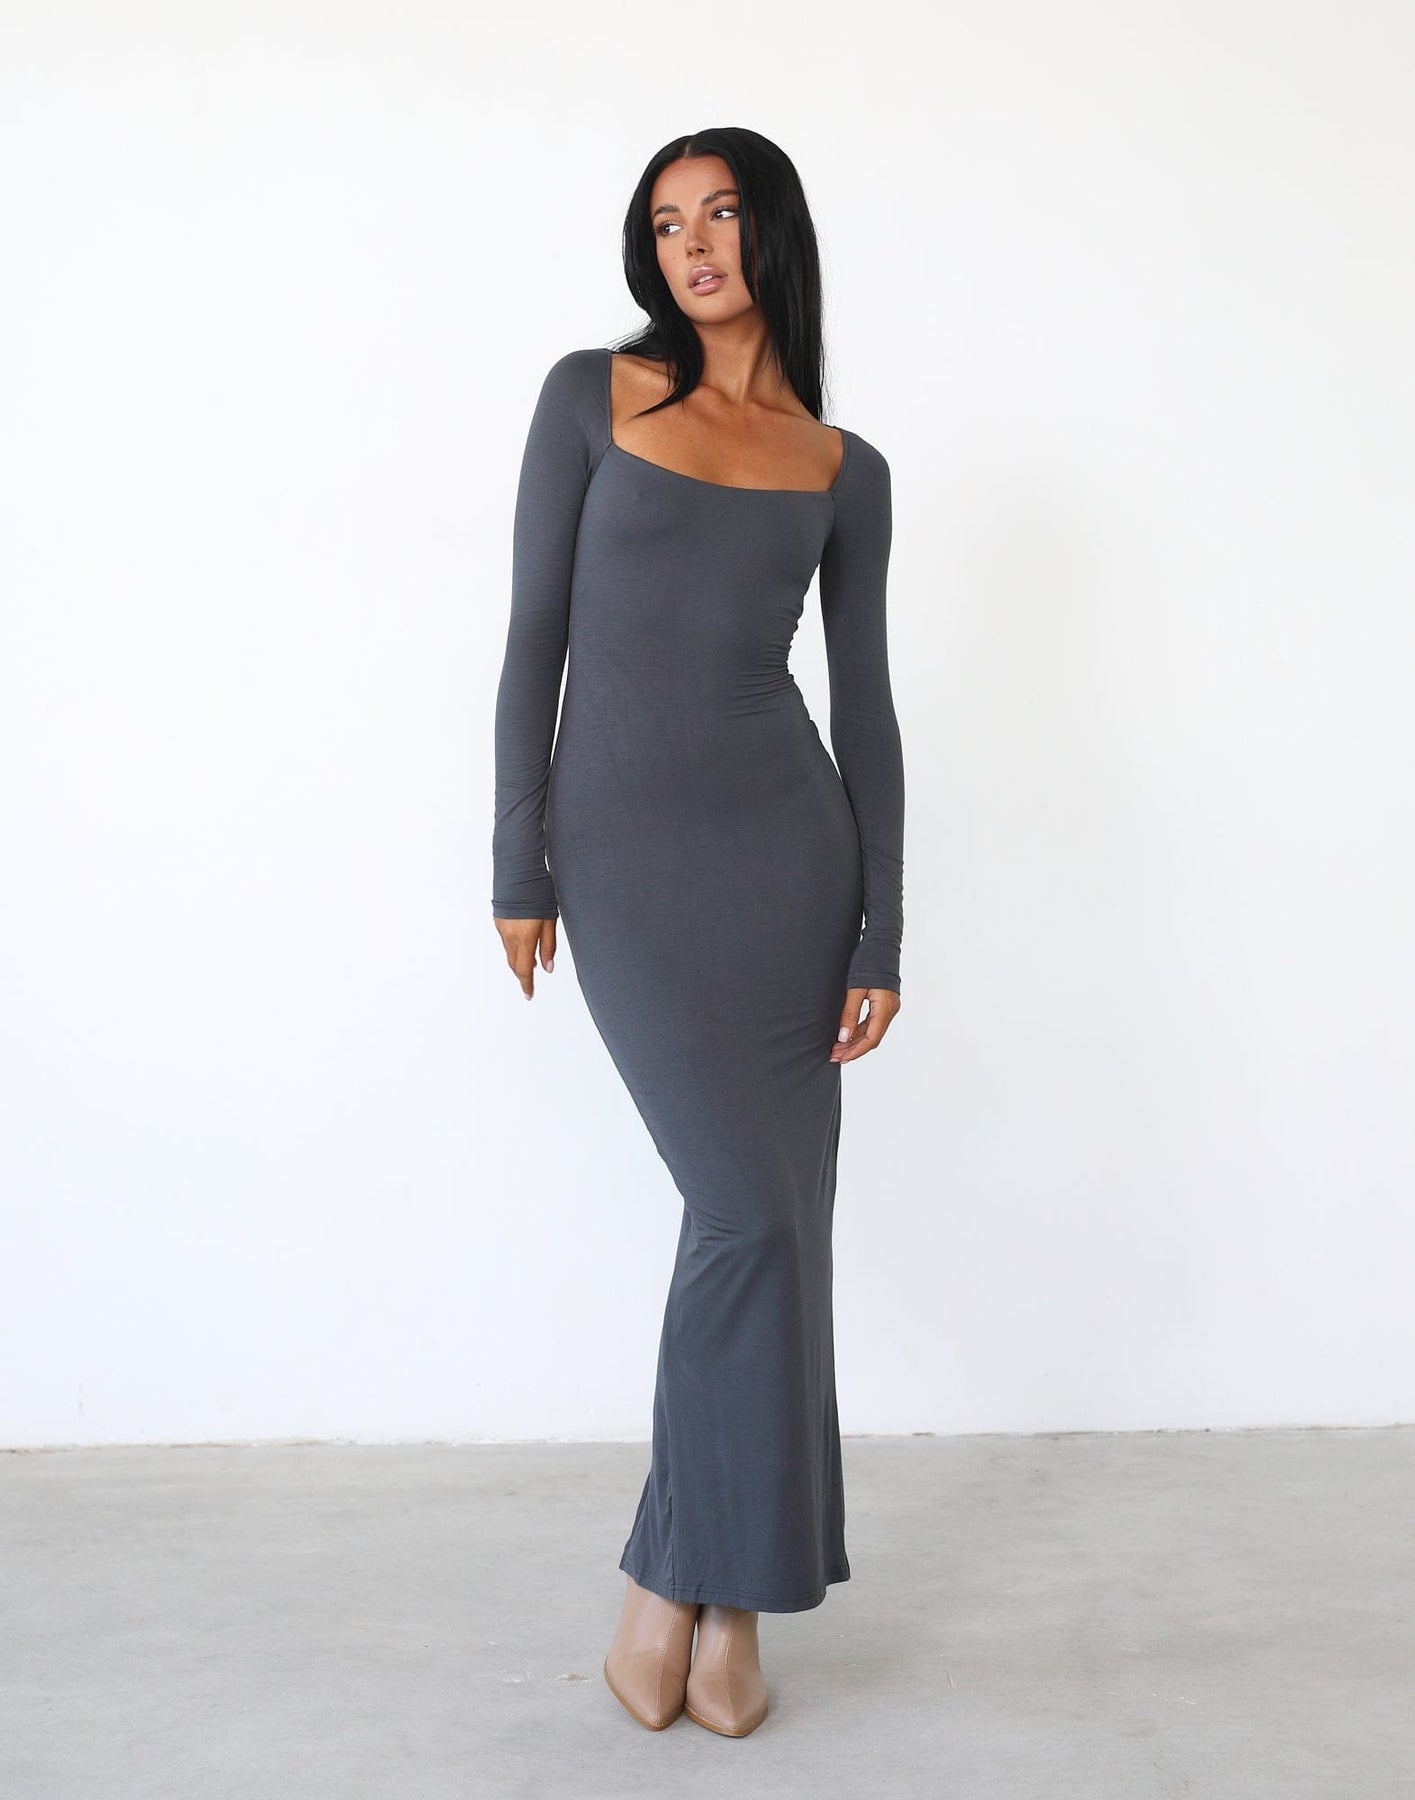 Eyes On Me Maxi Dress (Charcoal) - Long Sleeved Fitted Square Neck Maxi ...